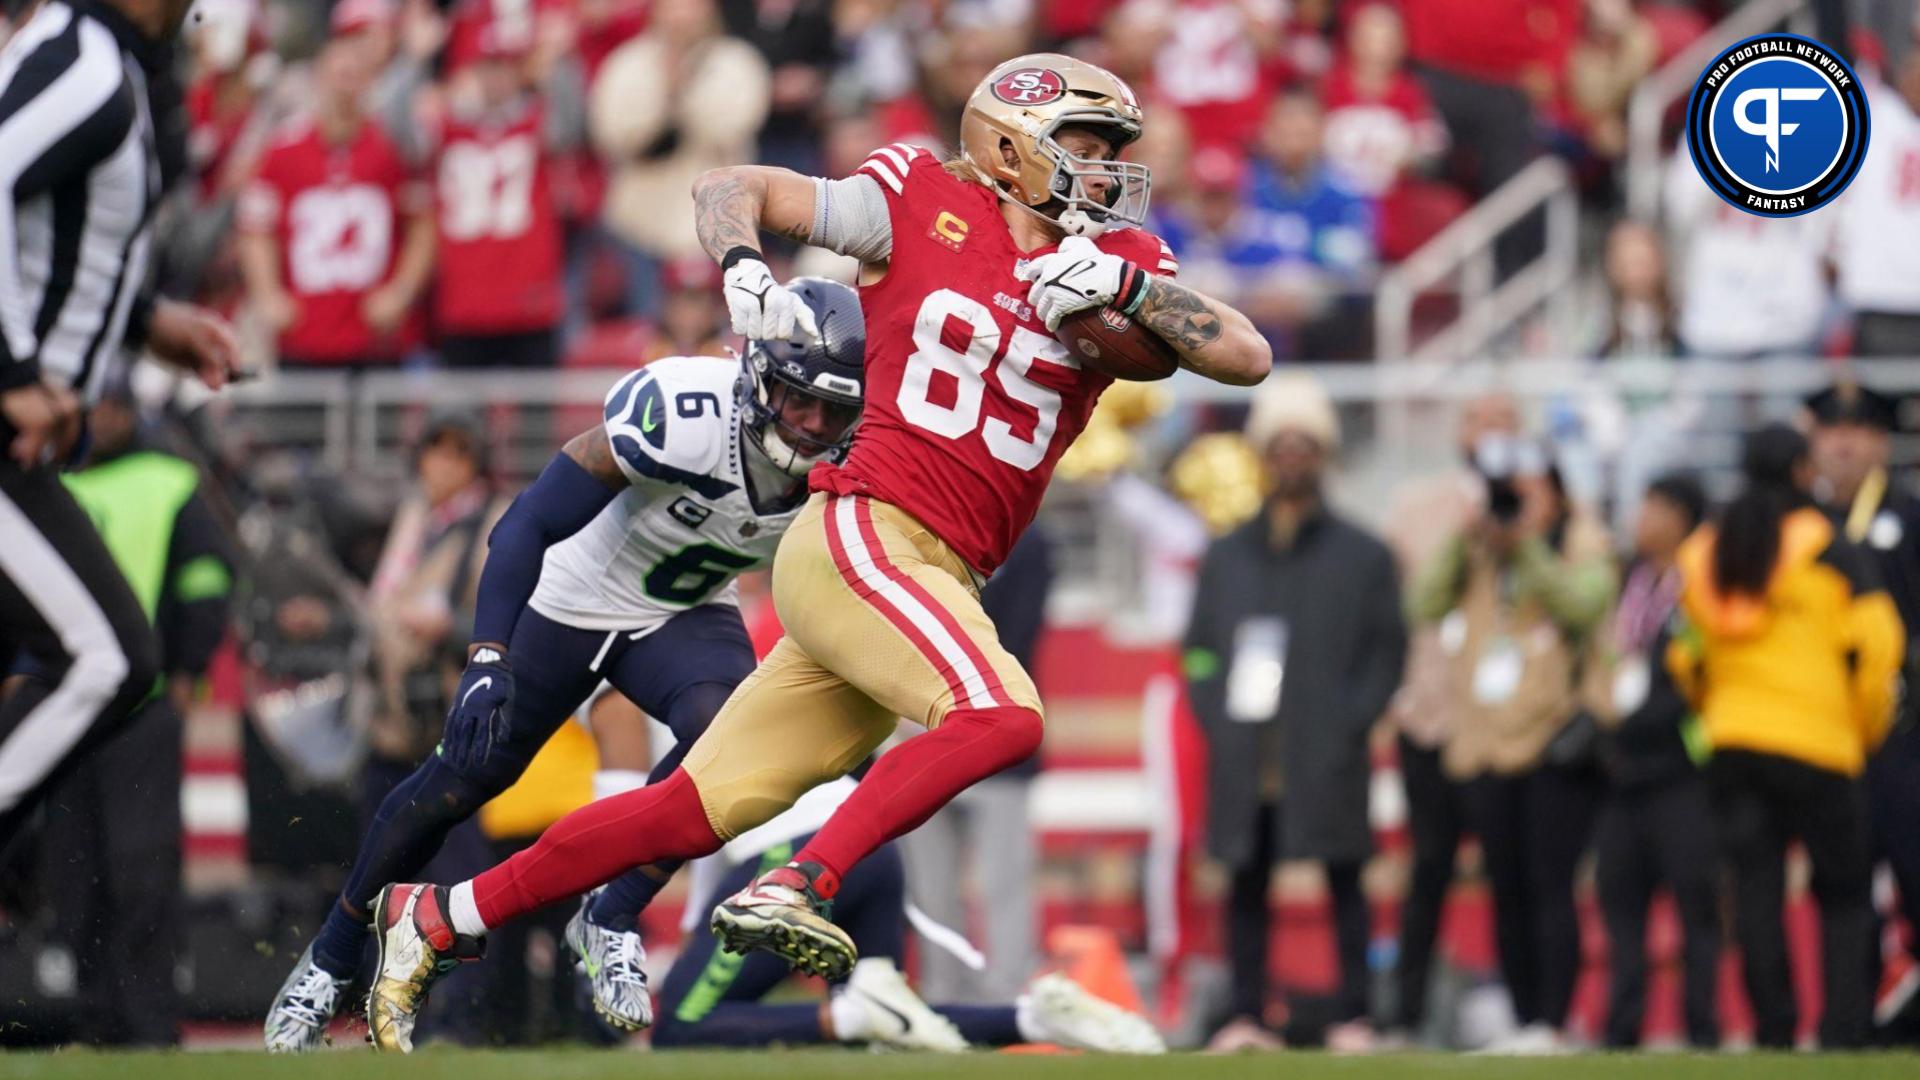 San Francisco 49ers tight end George Kittle (85) scores a touchdown in front of Seattle Seahawks safety Quandre Diggs (6) in the fourth quarter at Levi's Stadium.